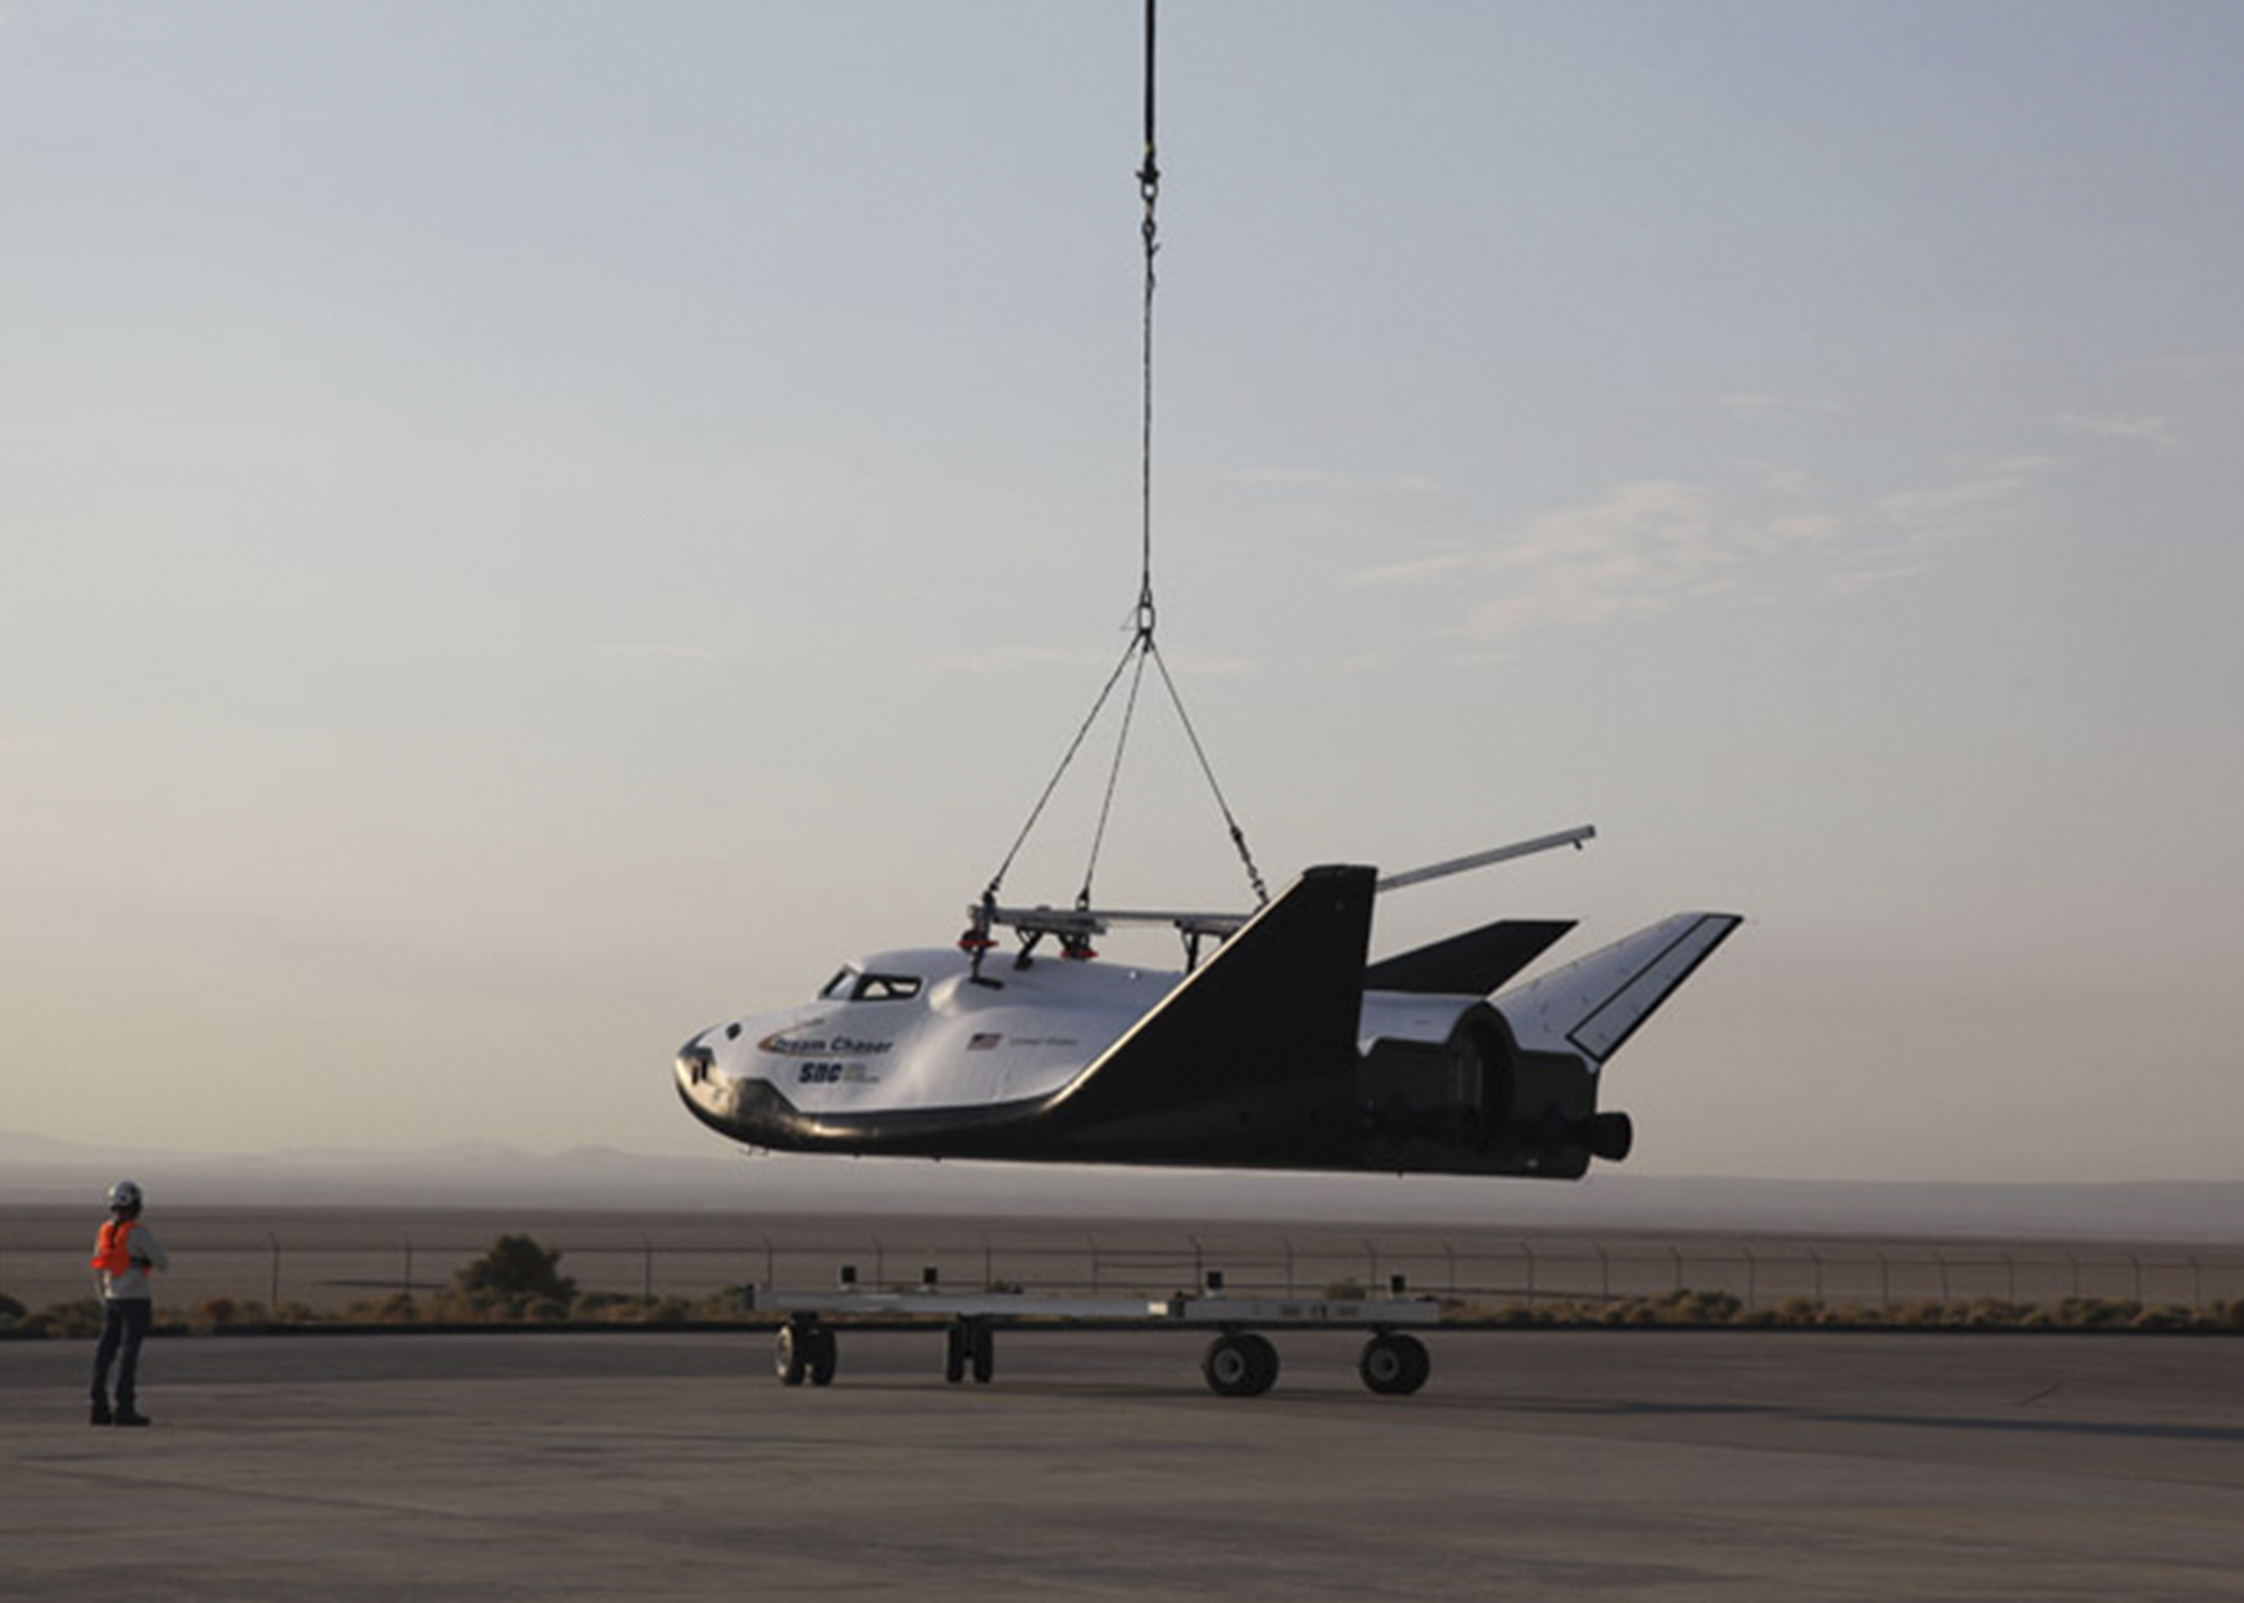 Sierra Nevada Corps Dream Chaser Spacecraft Completes Successful Test